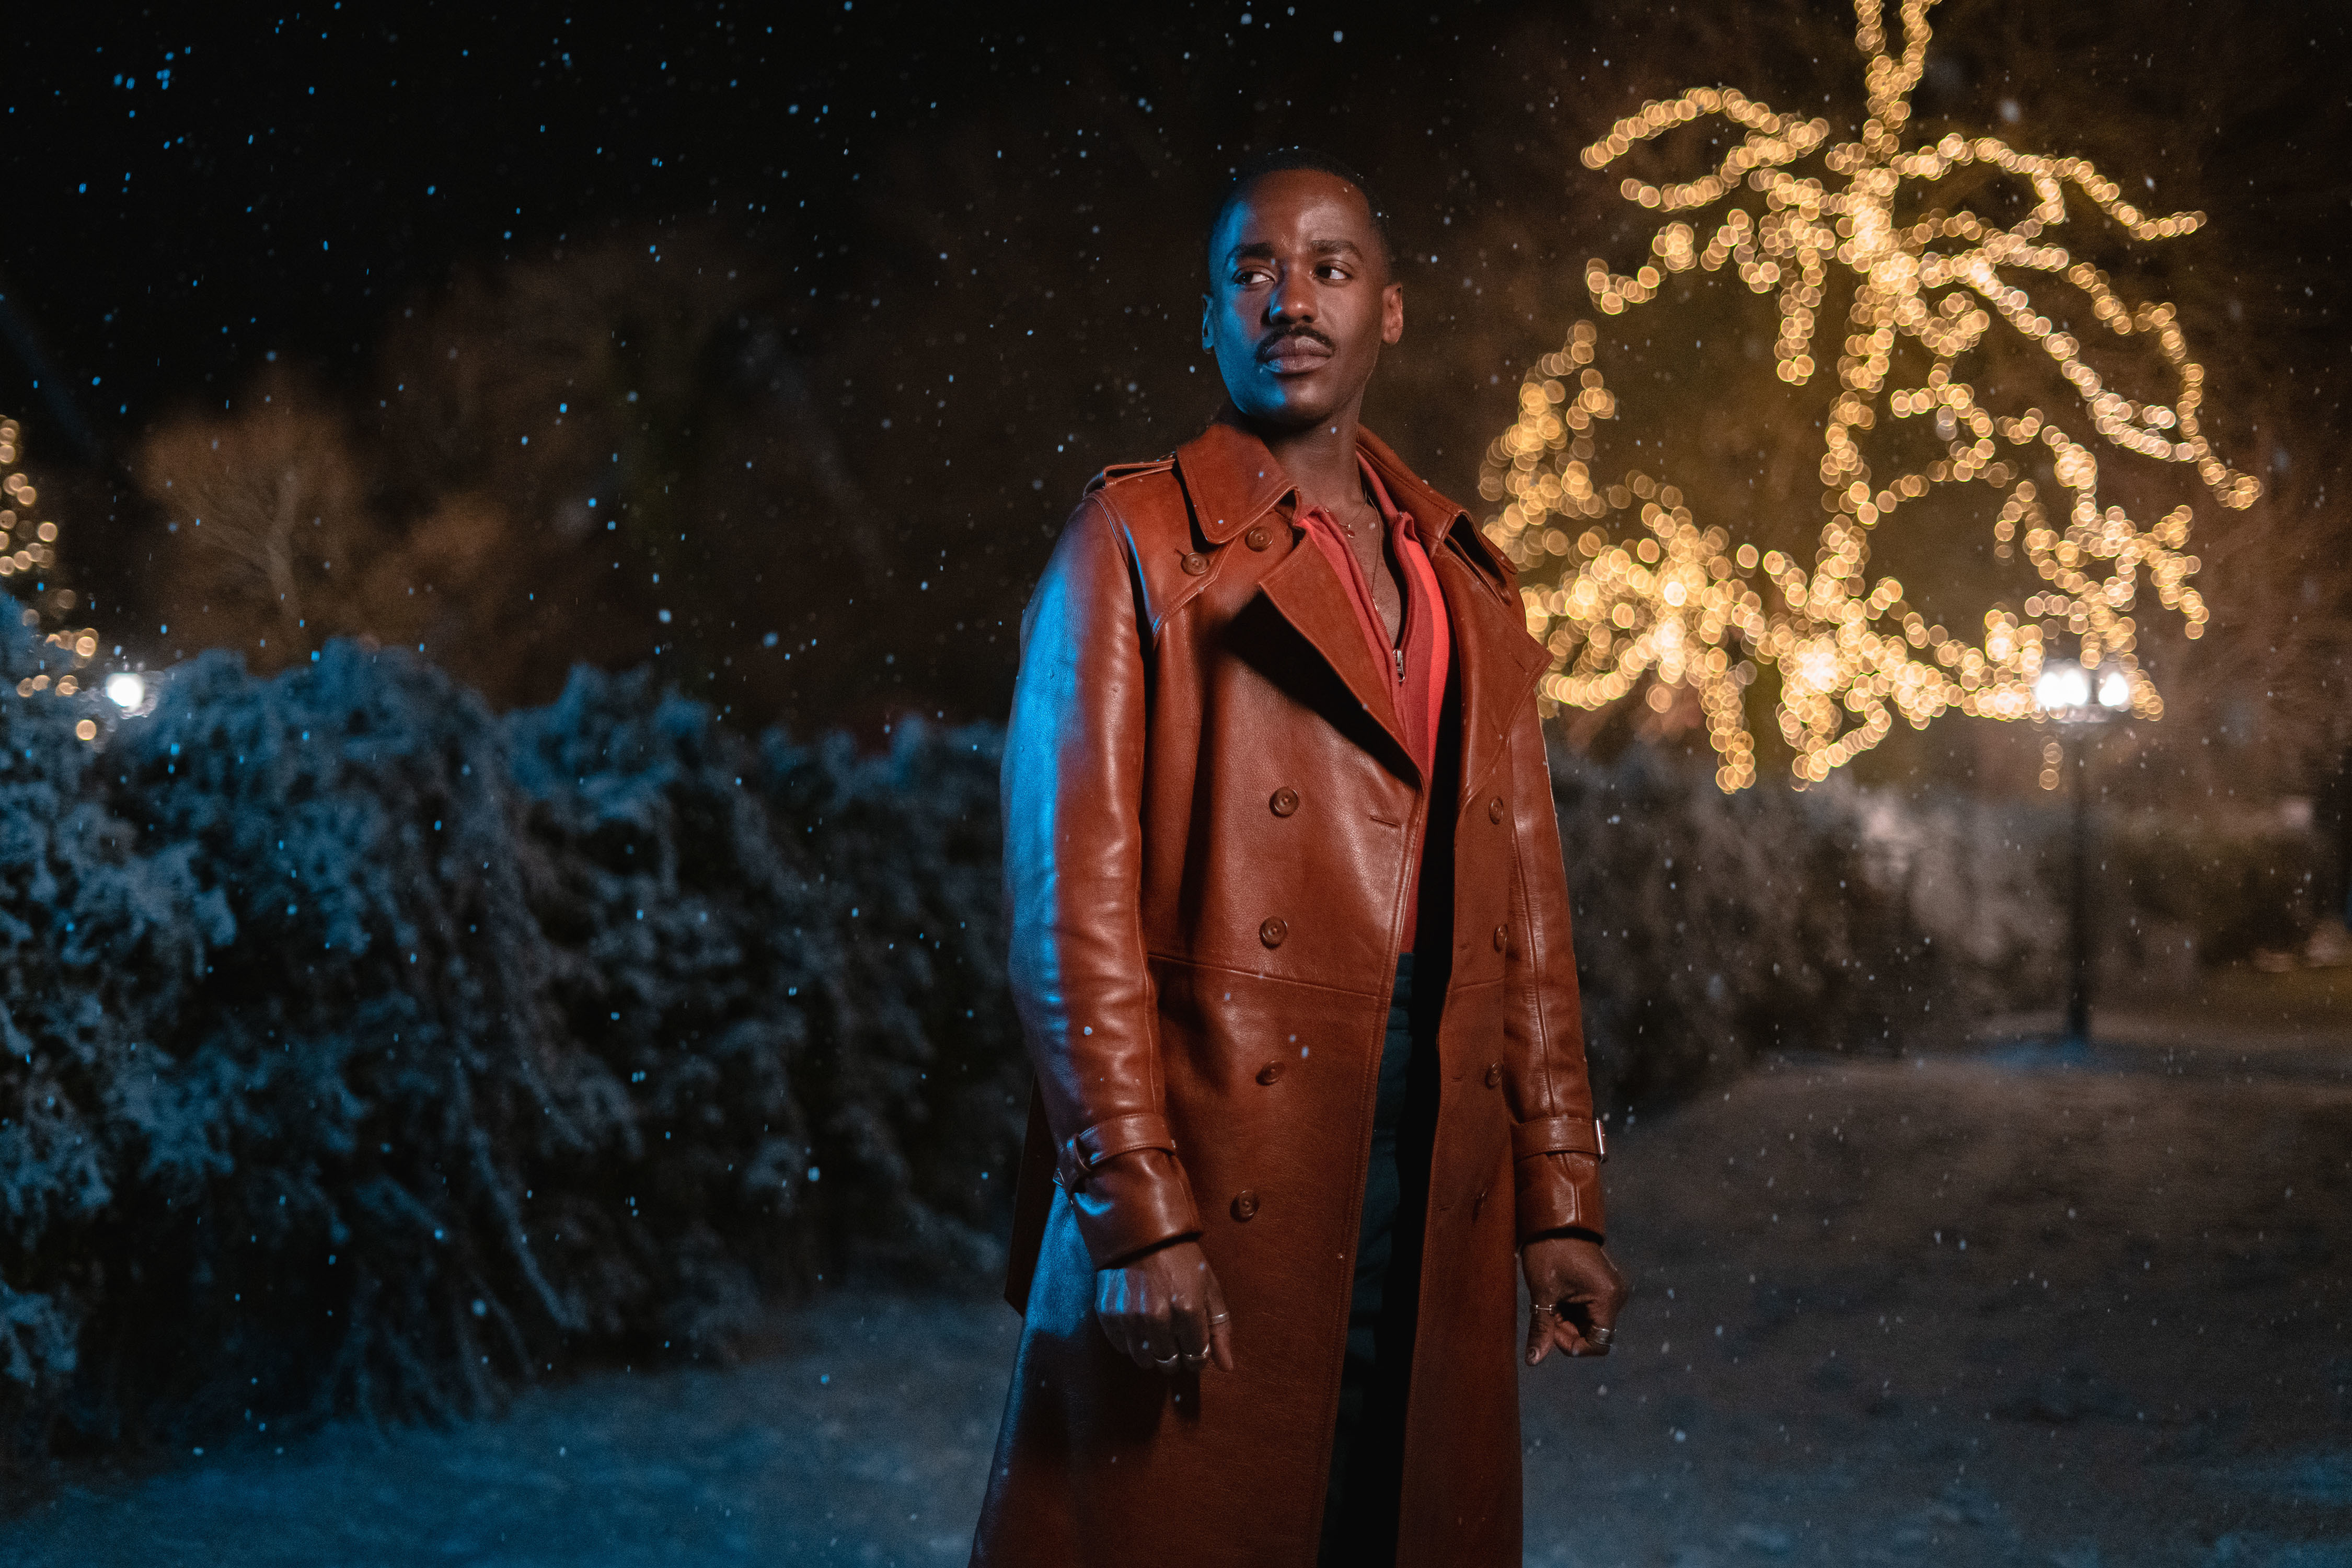 The Doctor (Ncuti Gatwa) stands in a garden with snow falling all around him and Christmas lights in a tree. behind him. He is wearing a long brown leather coat.